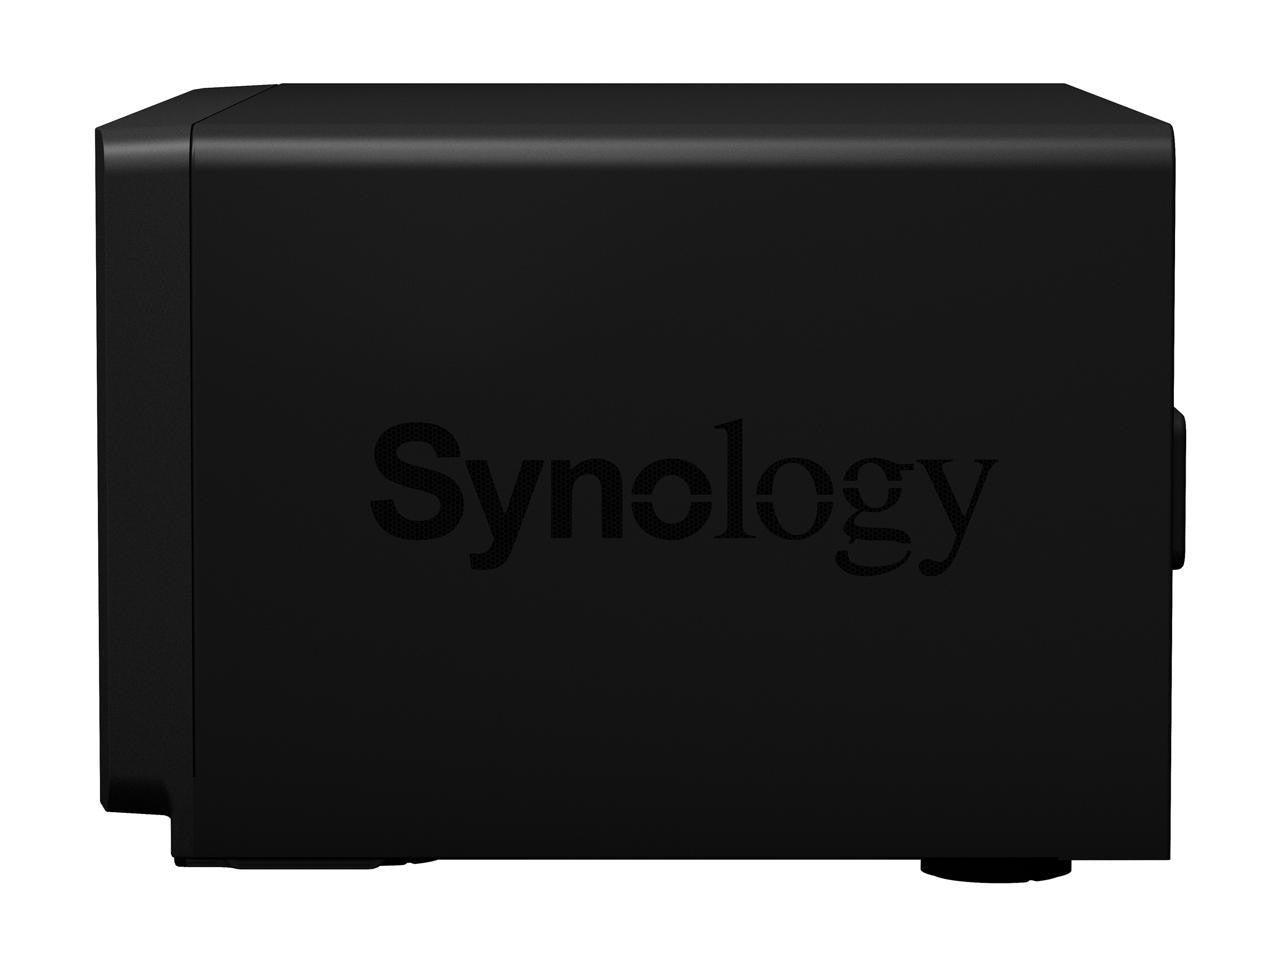 Synology DS1821+ 8-BAY DiskStation with 4GB Synology RAM and 96TB (8x12TB) Synology Enterprise HAT5300 Drives Fully Assembled and Tested